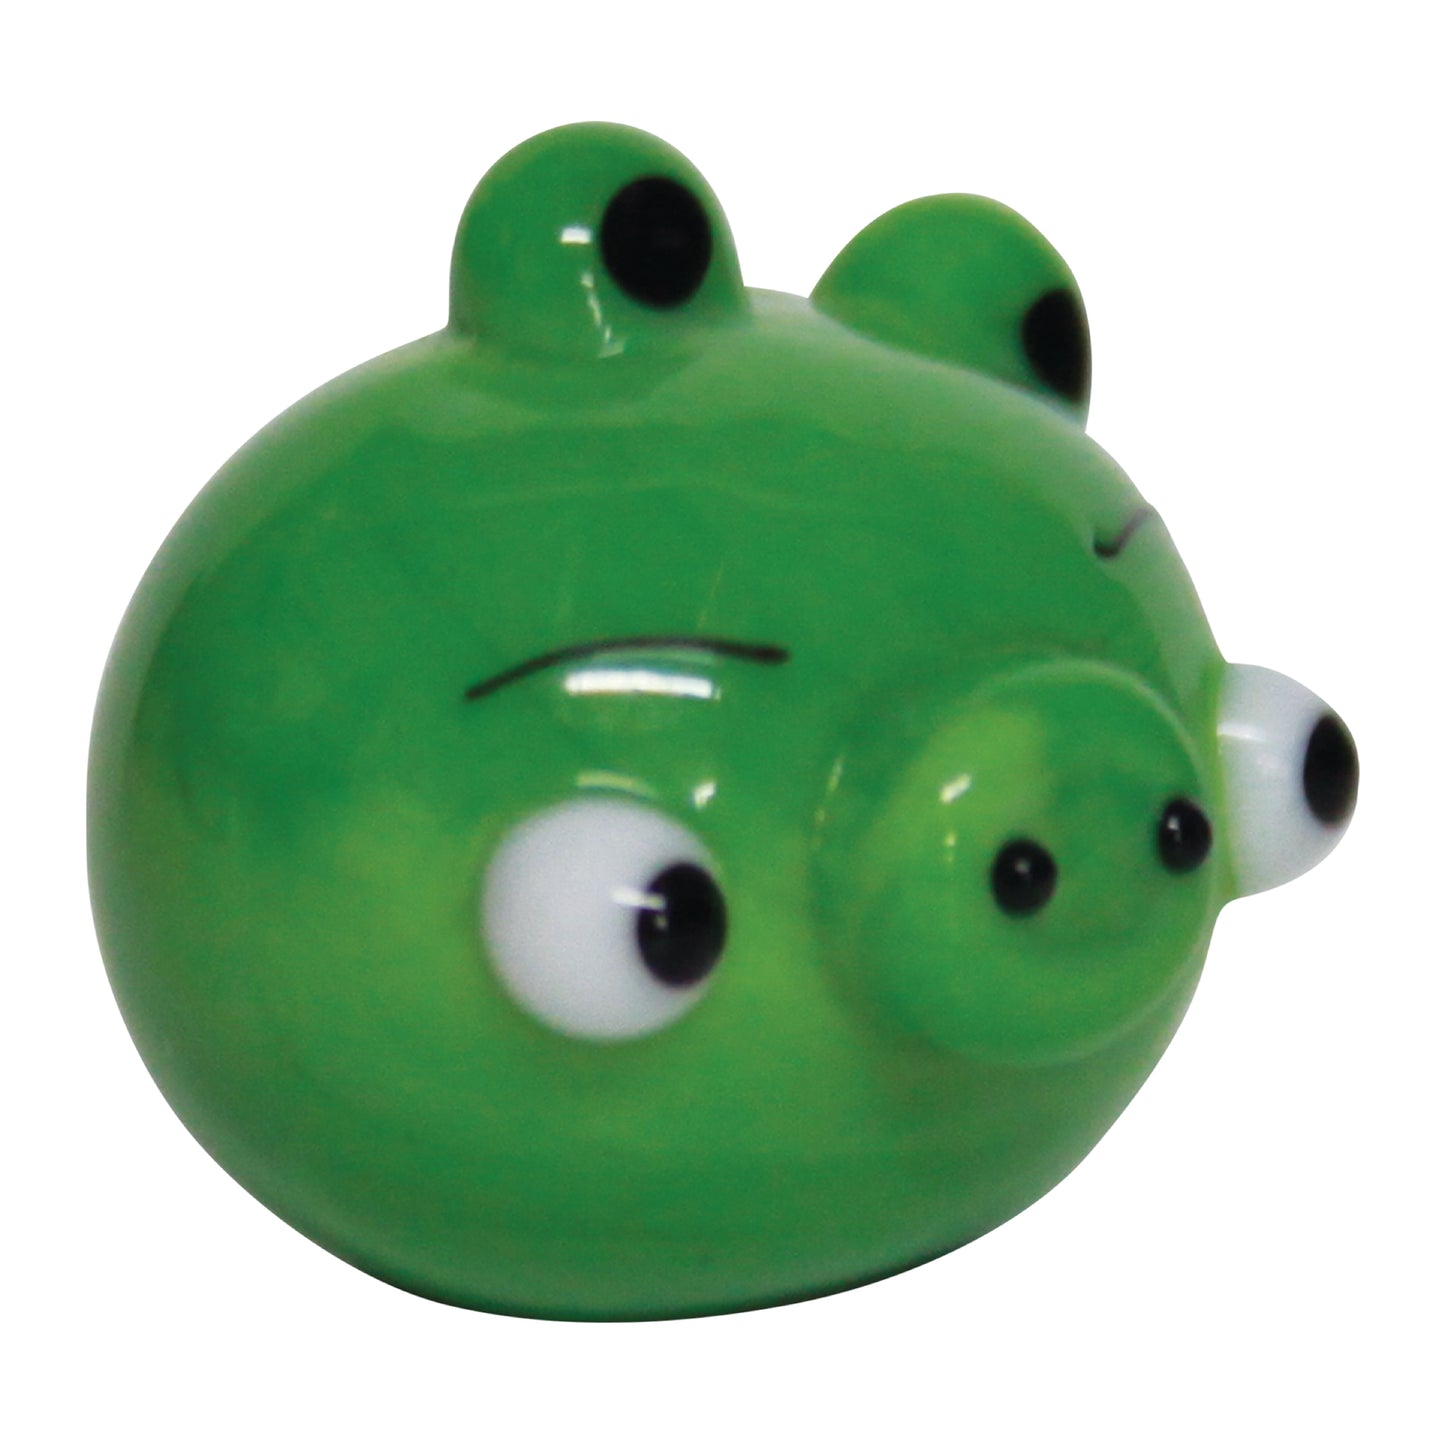 GlassWorld Angry Birds Med Pig collectible miniature glass figurine Product Image